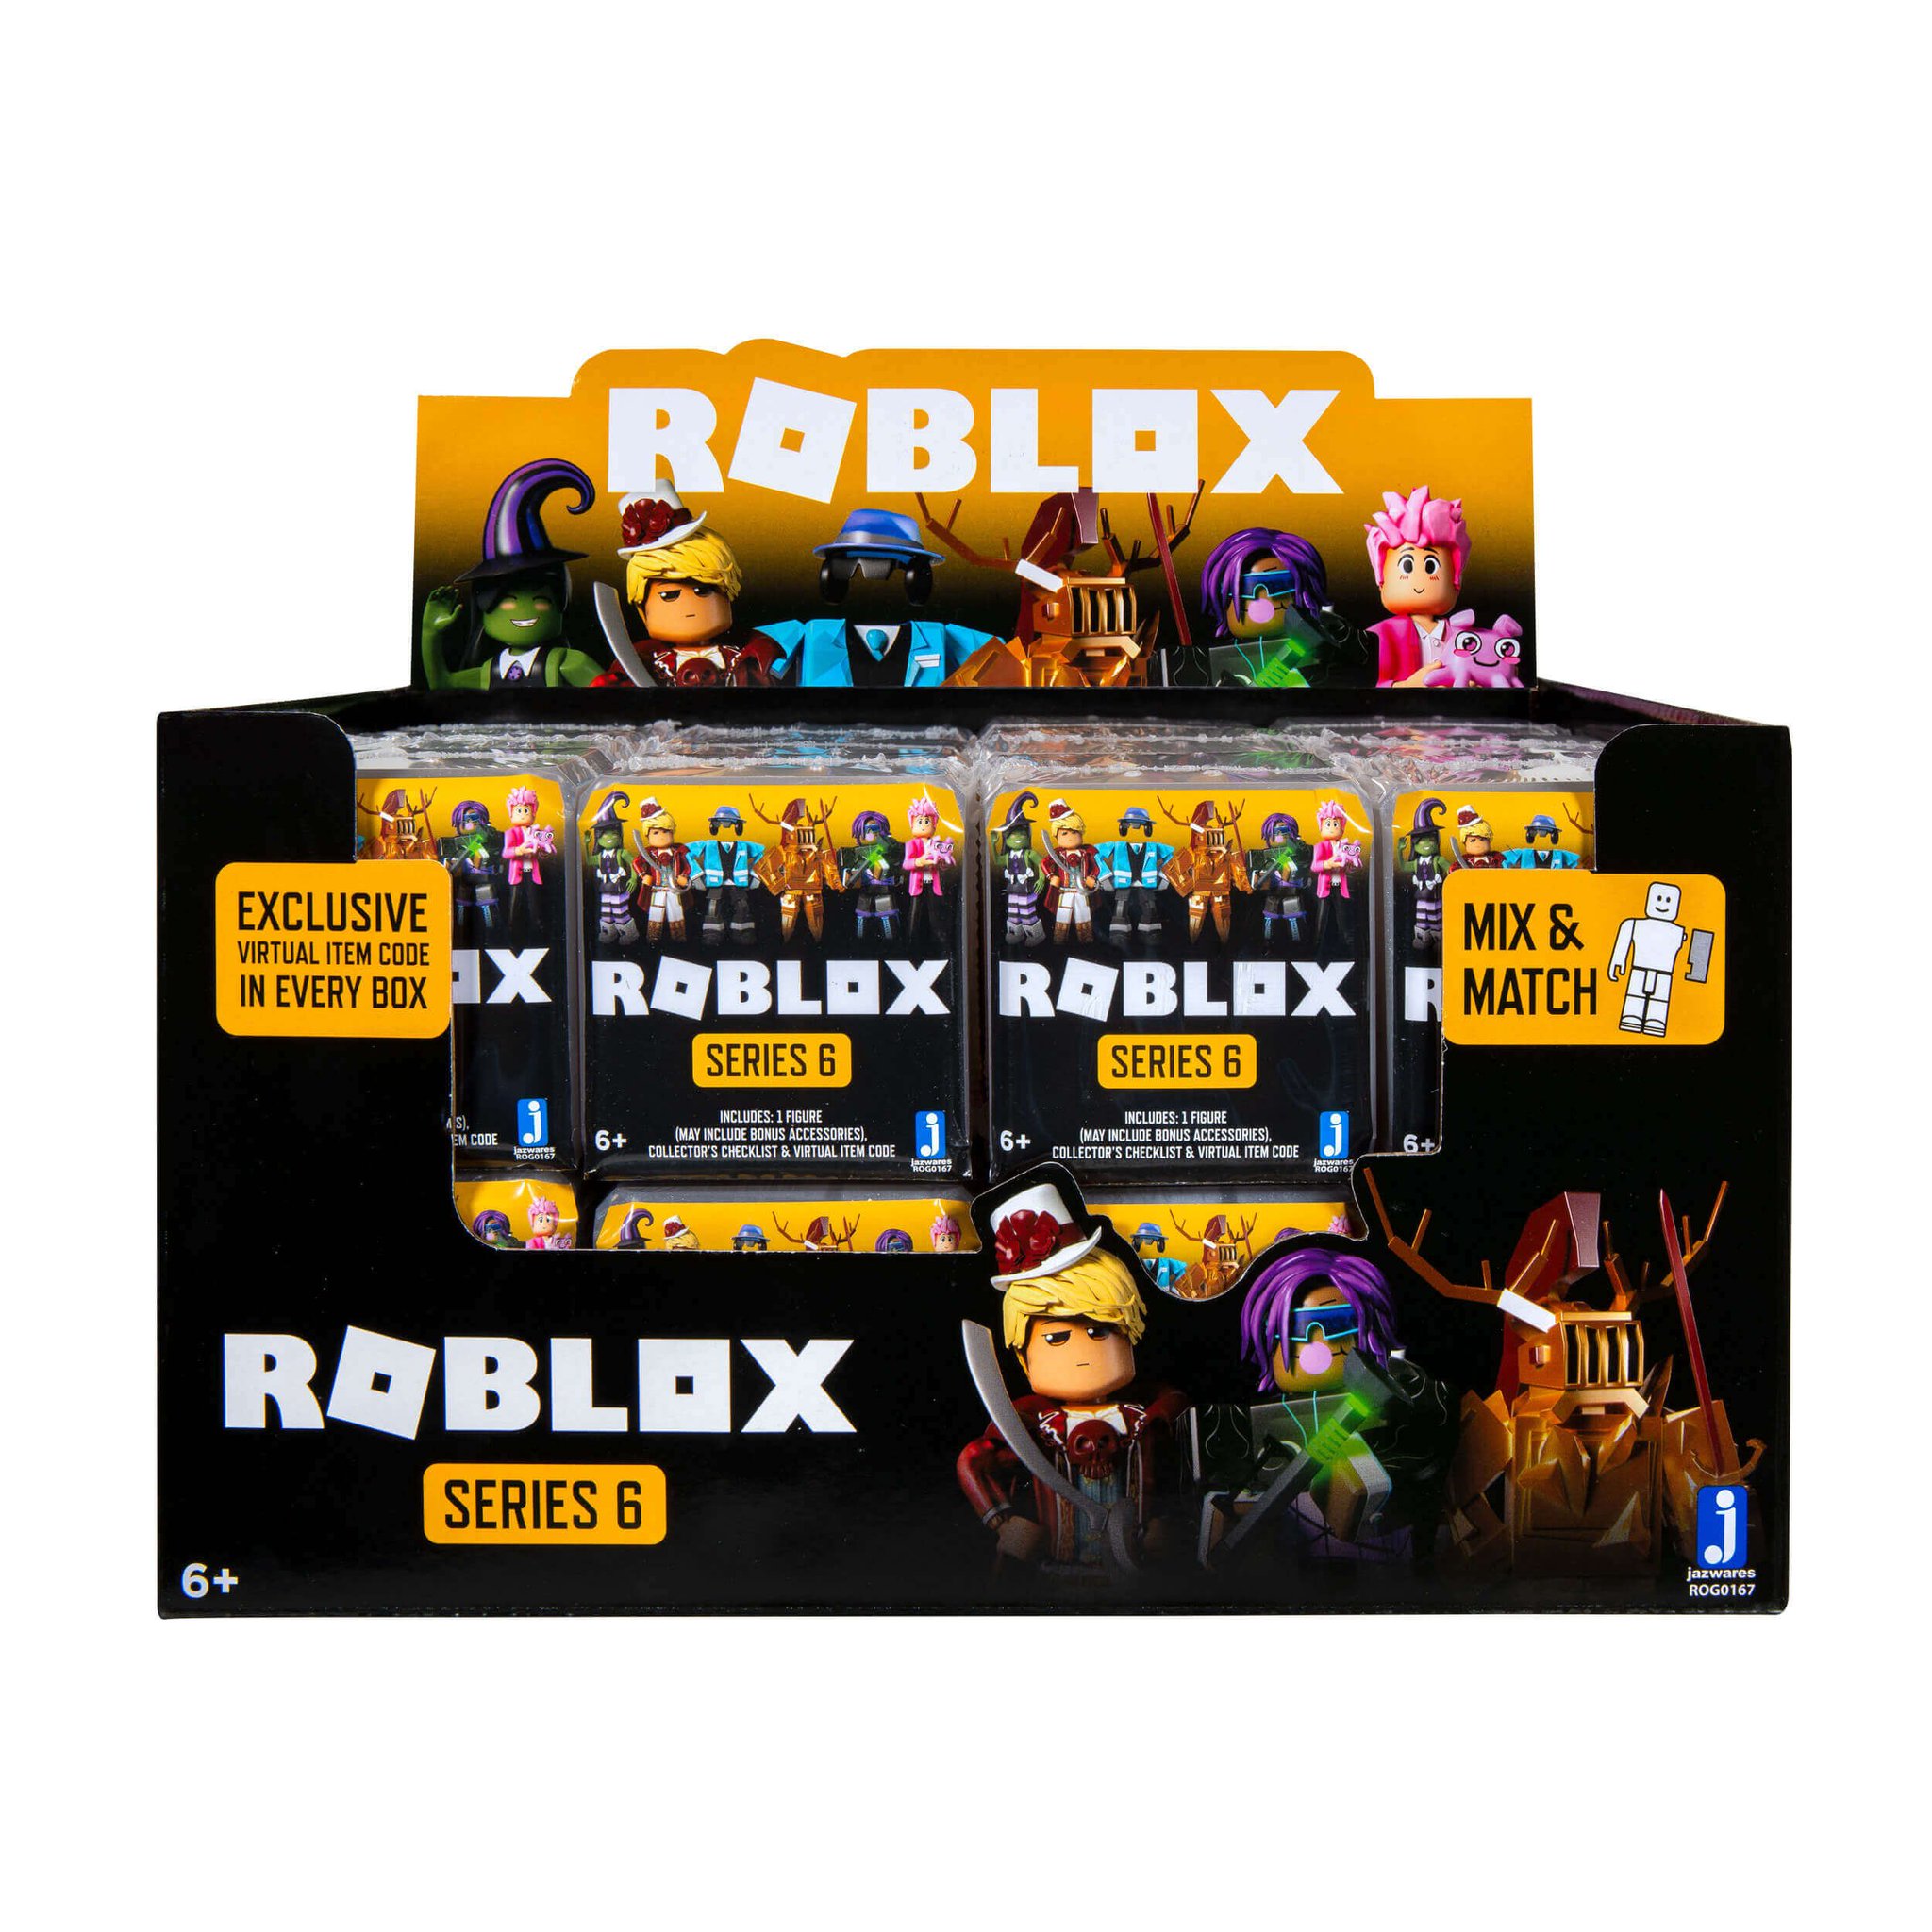 Foursci On Twitter Robloxtoys Celebrity Series 5 Diamond Boxes - bitsquid en twitter roblox hexaria toys are here go to